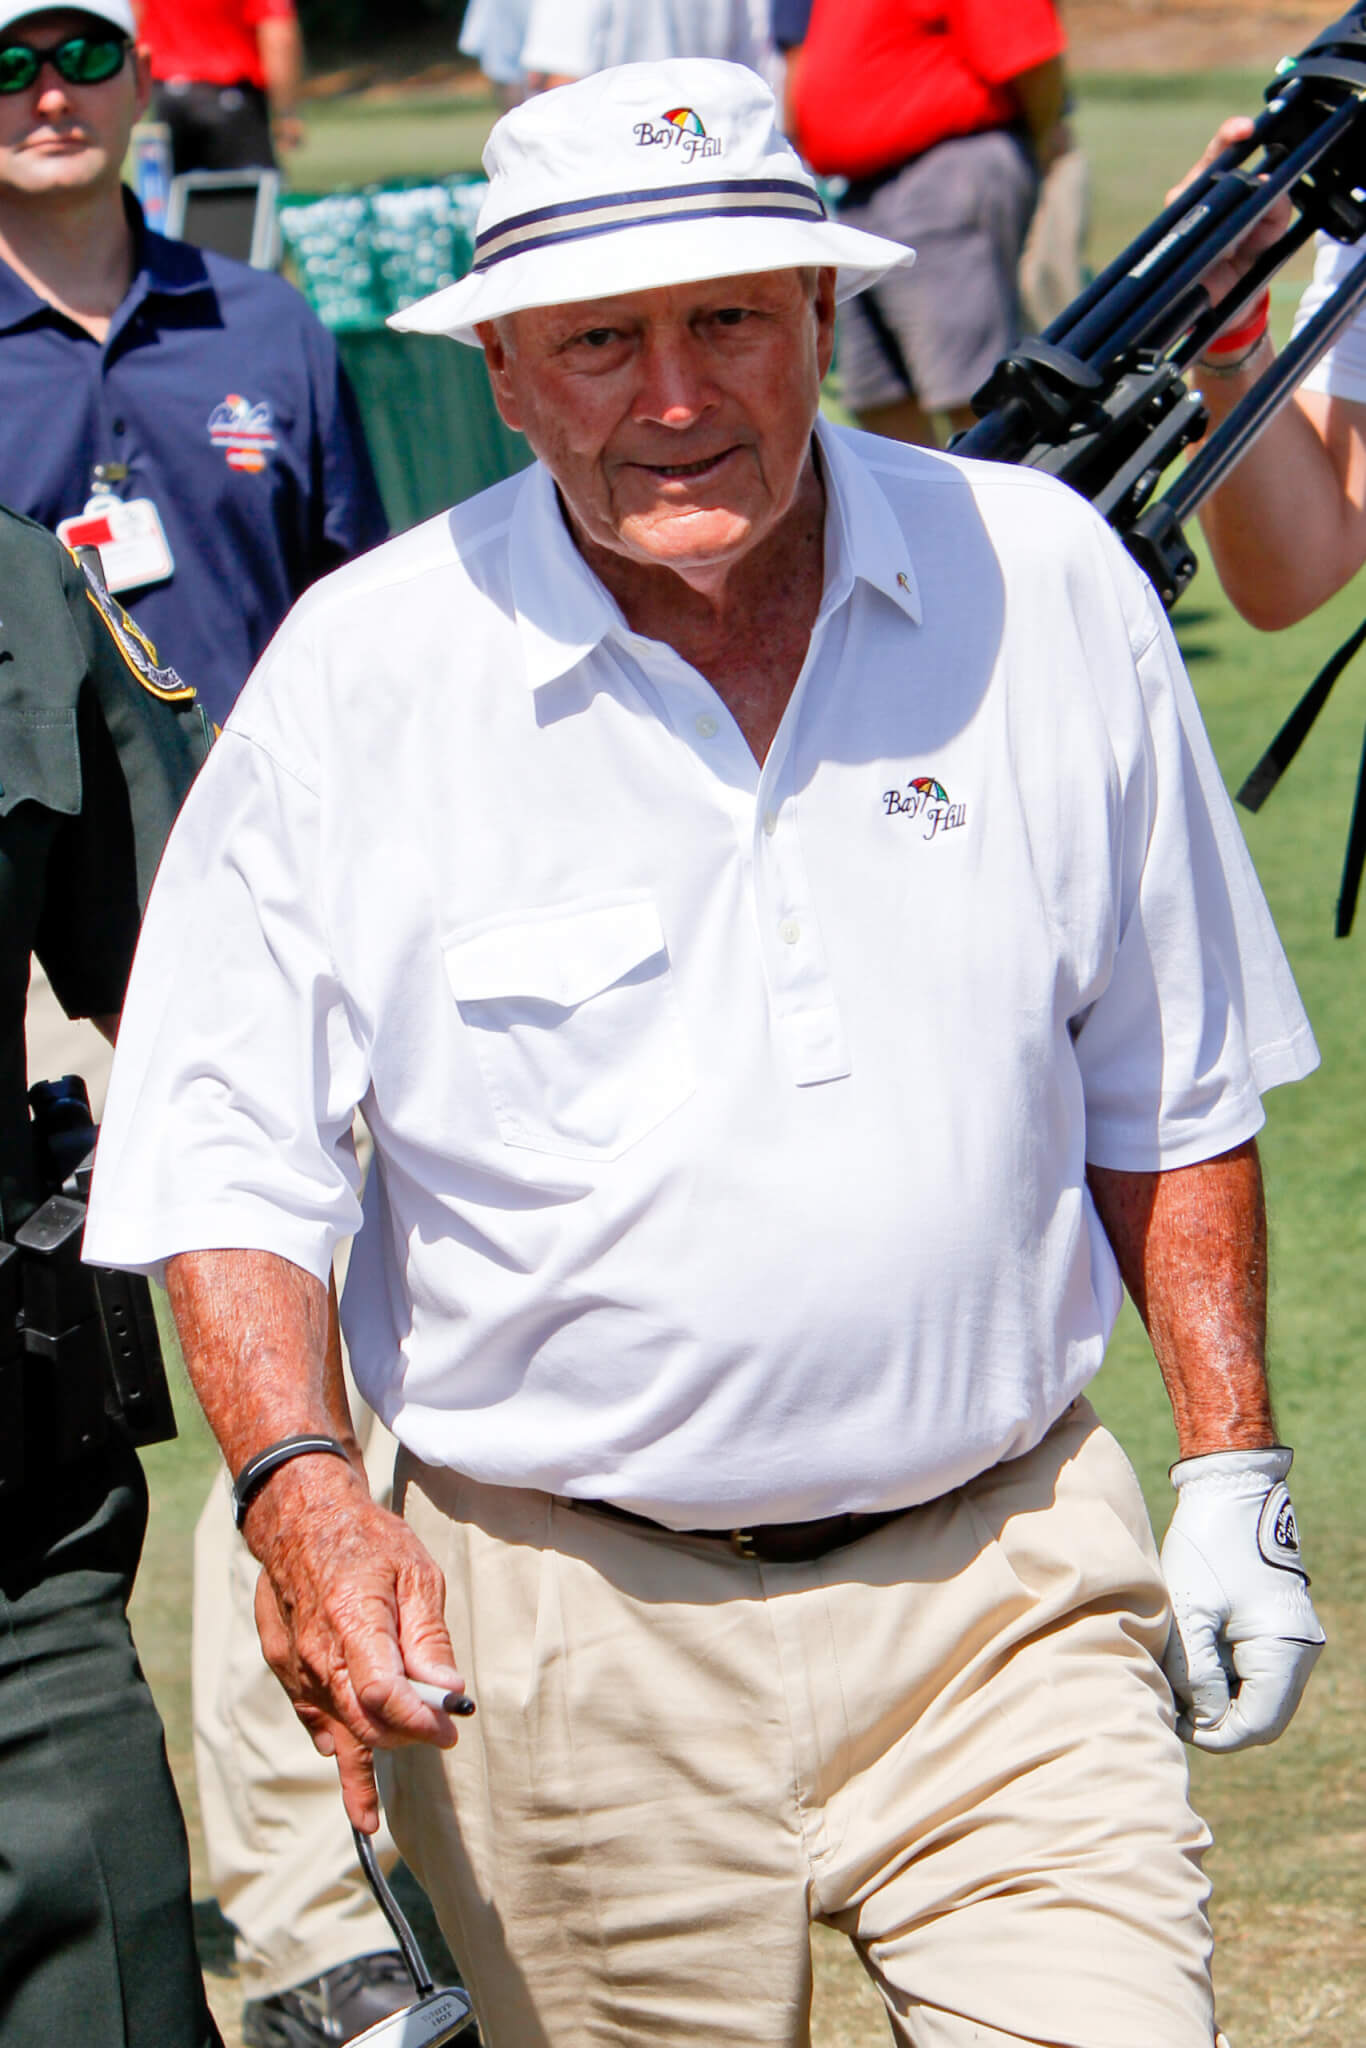 Arnold Palmer at the Arnold Palmer Invitational Golf Tournament in Florida, 2011